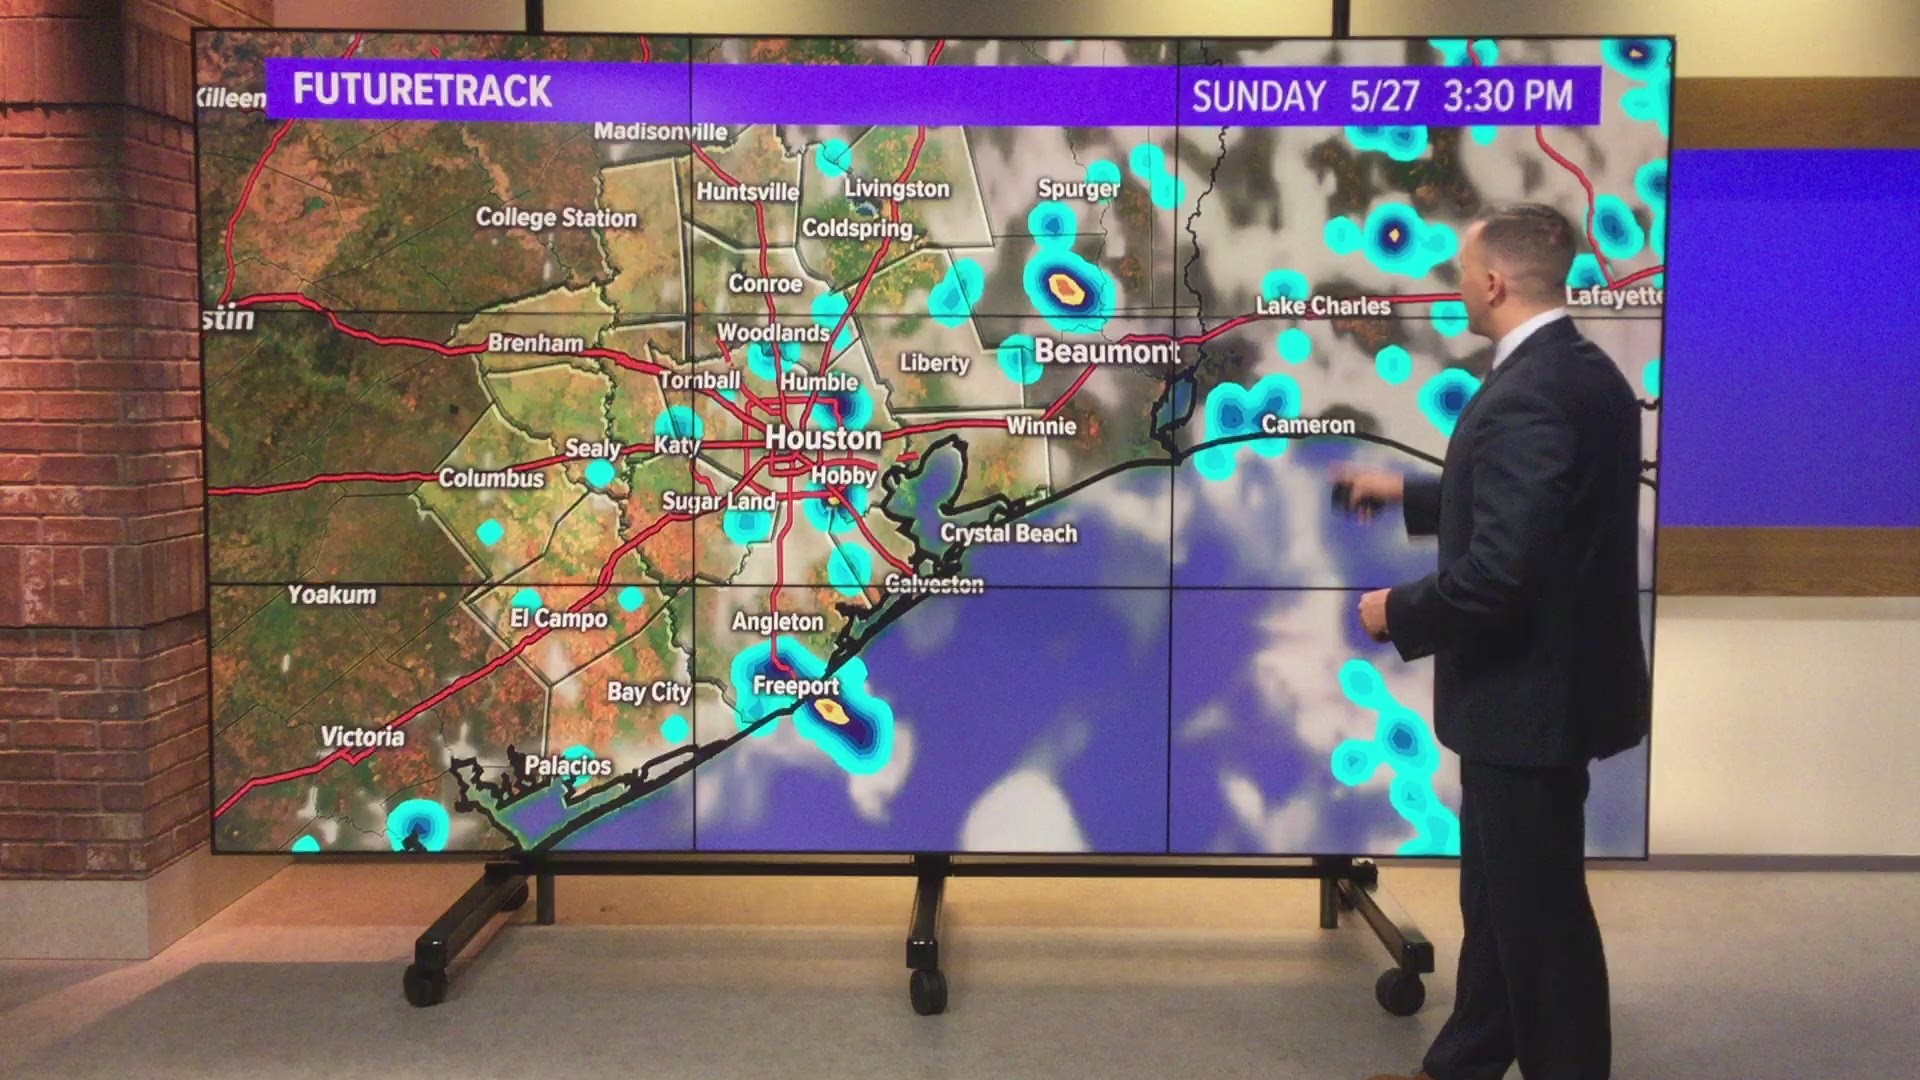 KHOU 11 Meteorologist Blake Mathews says Sunday's weather is looking pretty good. There is a very slight chance of rain. 